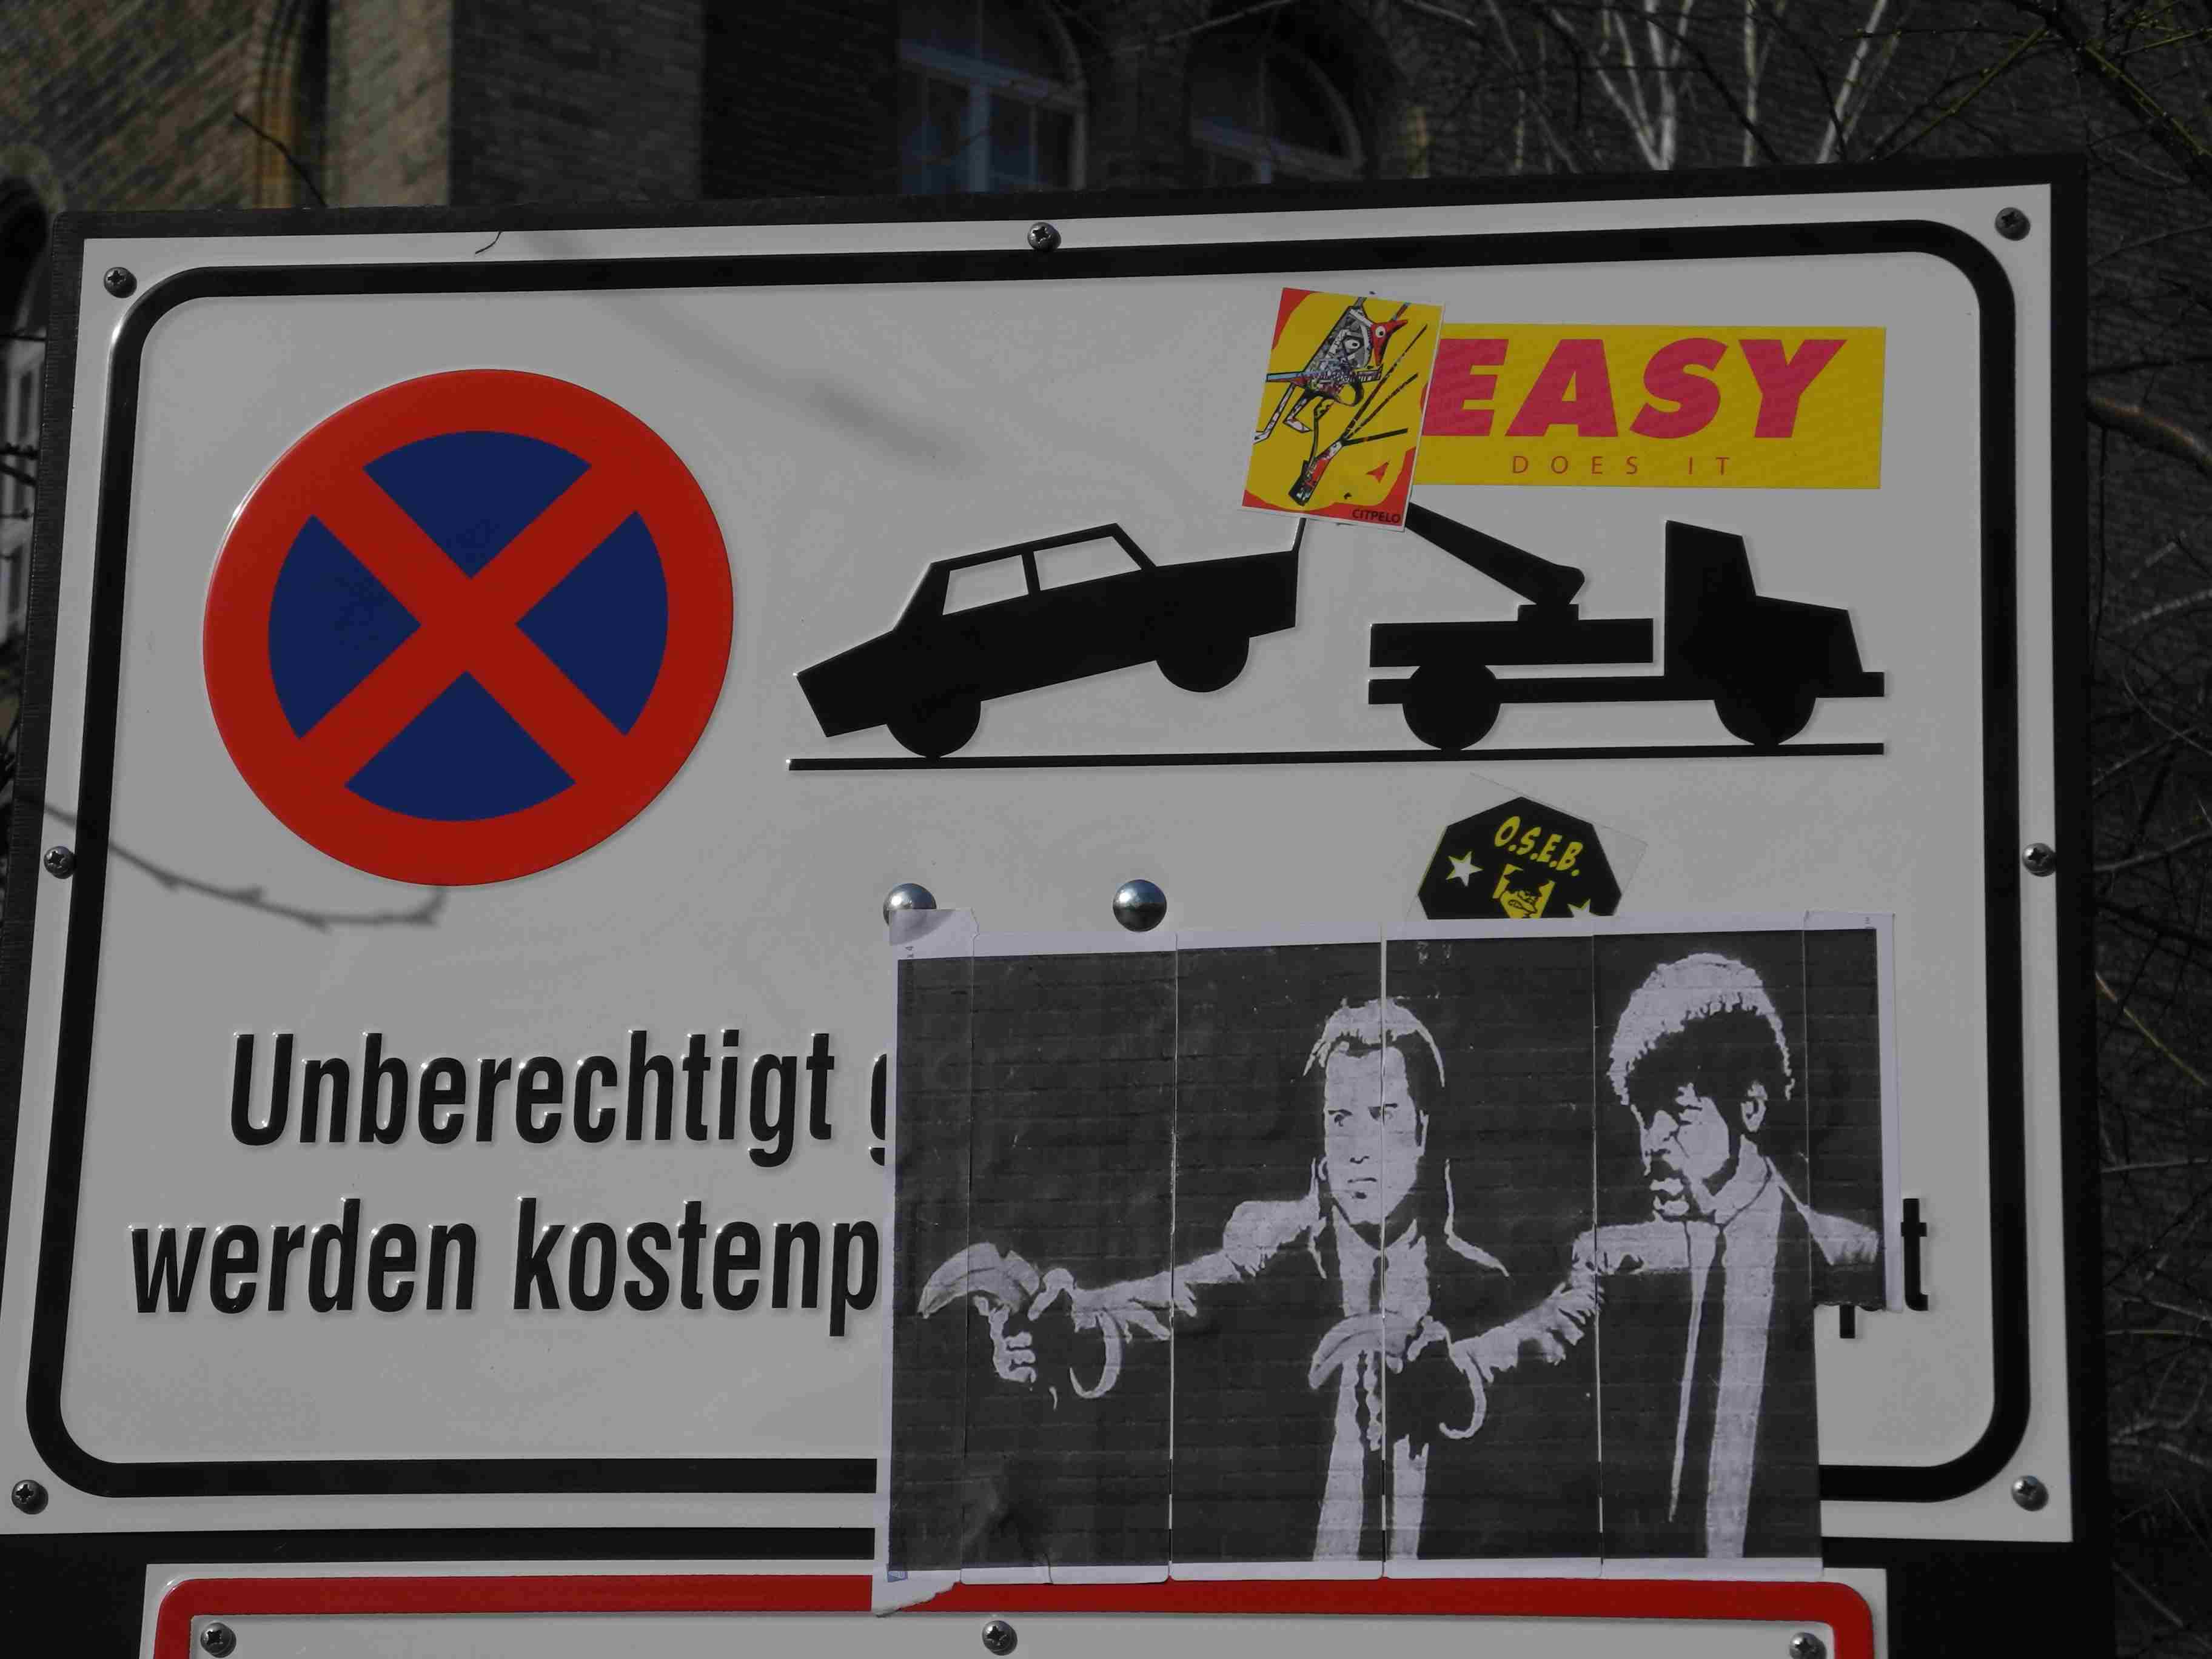 easy_does_it_stickers_on_streetsigns